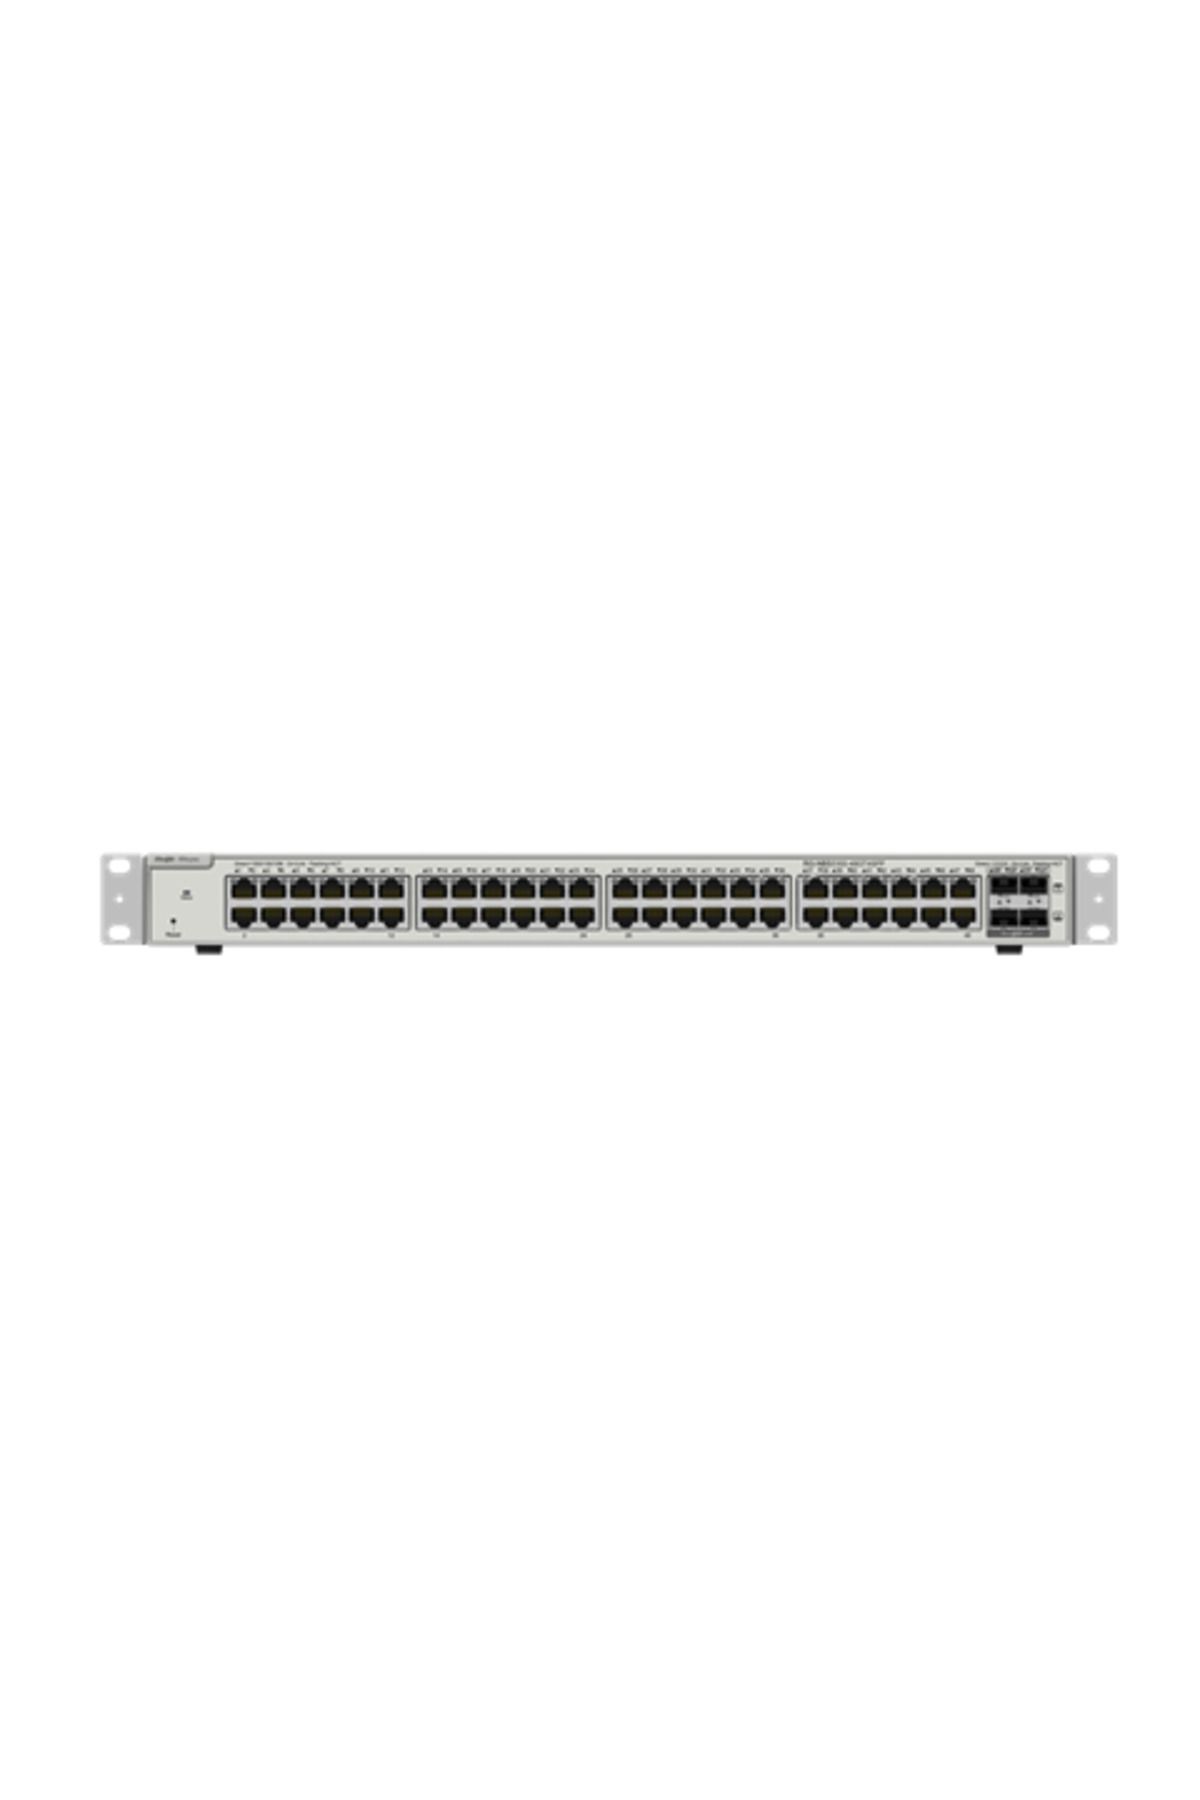 Universal Ruijie RG-NBS3200-48GT4XS-P 48-Port L2 Managed POE 10G Switch,4 -10G SFP+ Slots, 370W PoE